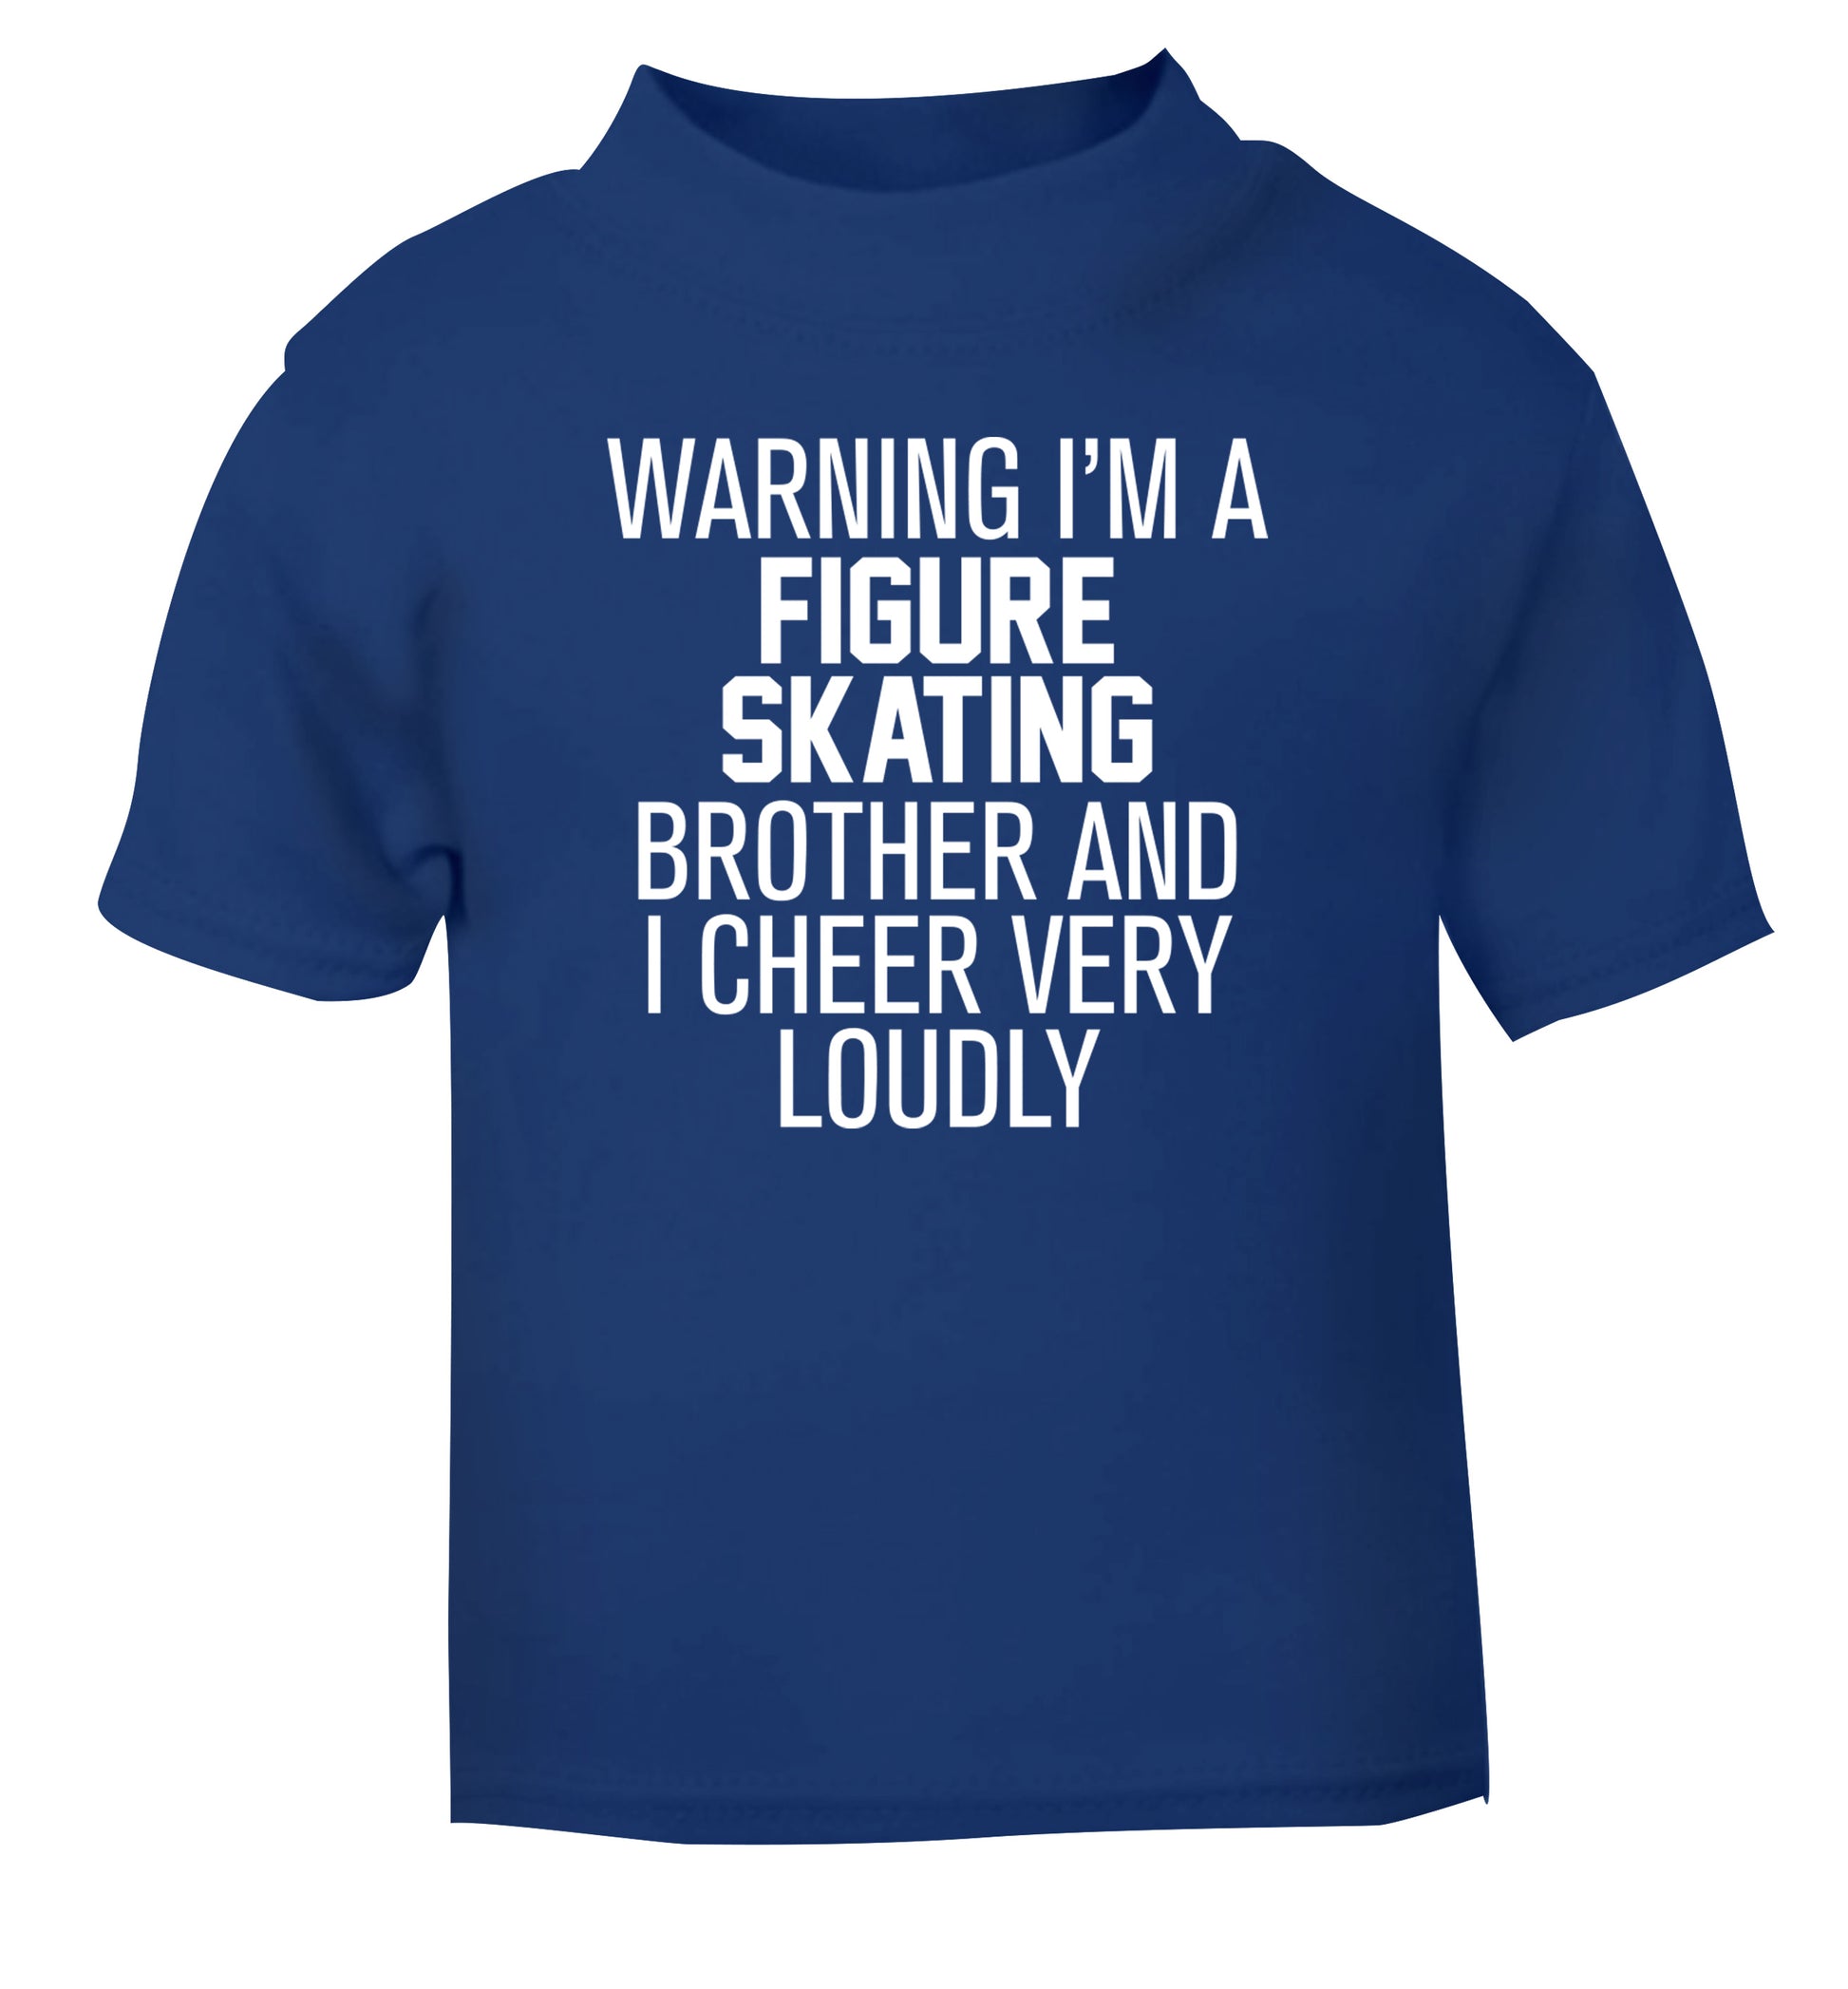 Warning I'm a figure skating brother and I cheer very loudly blue Baby Toddler Tshirt 2 Years